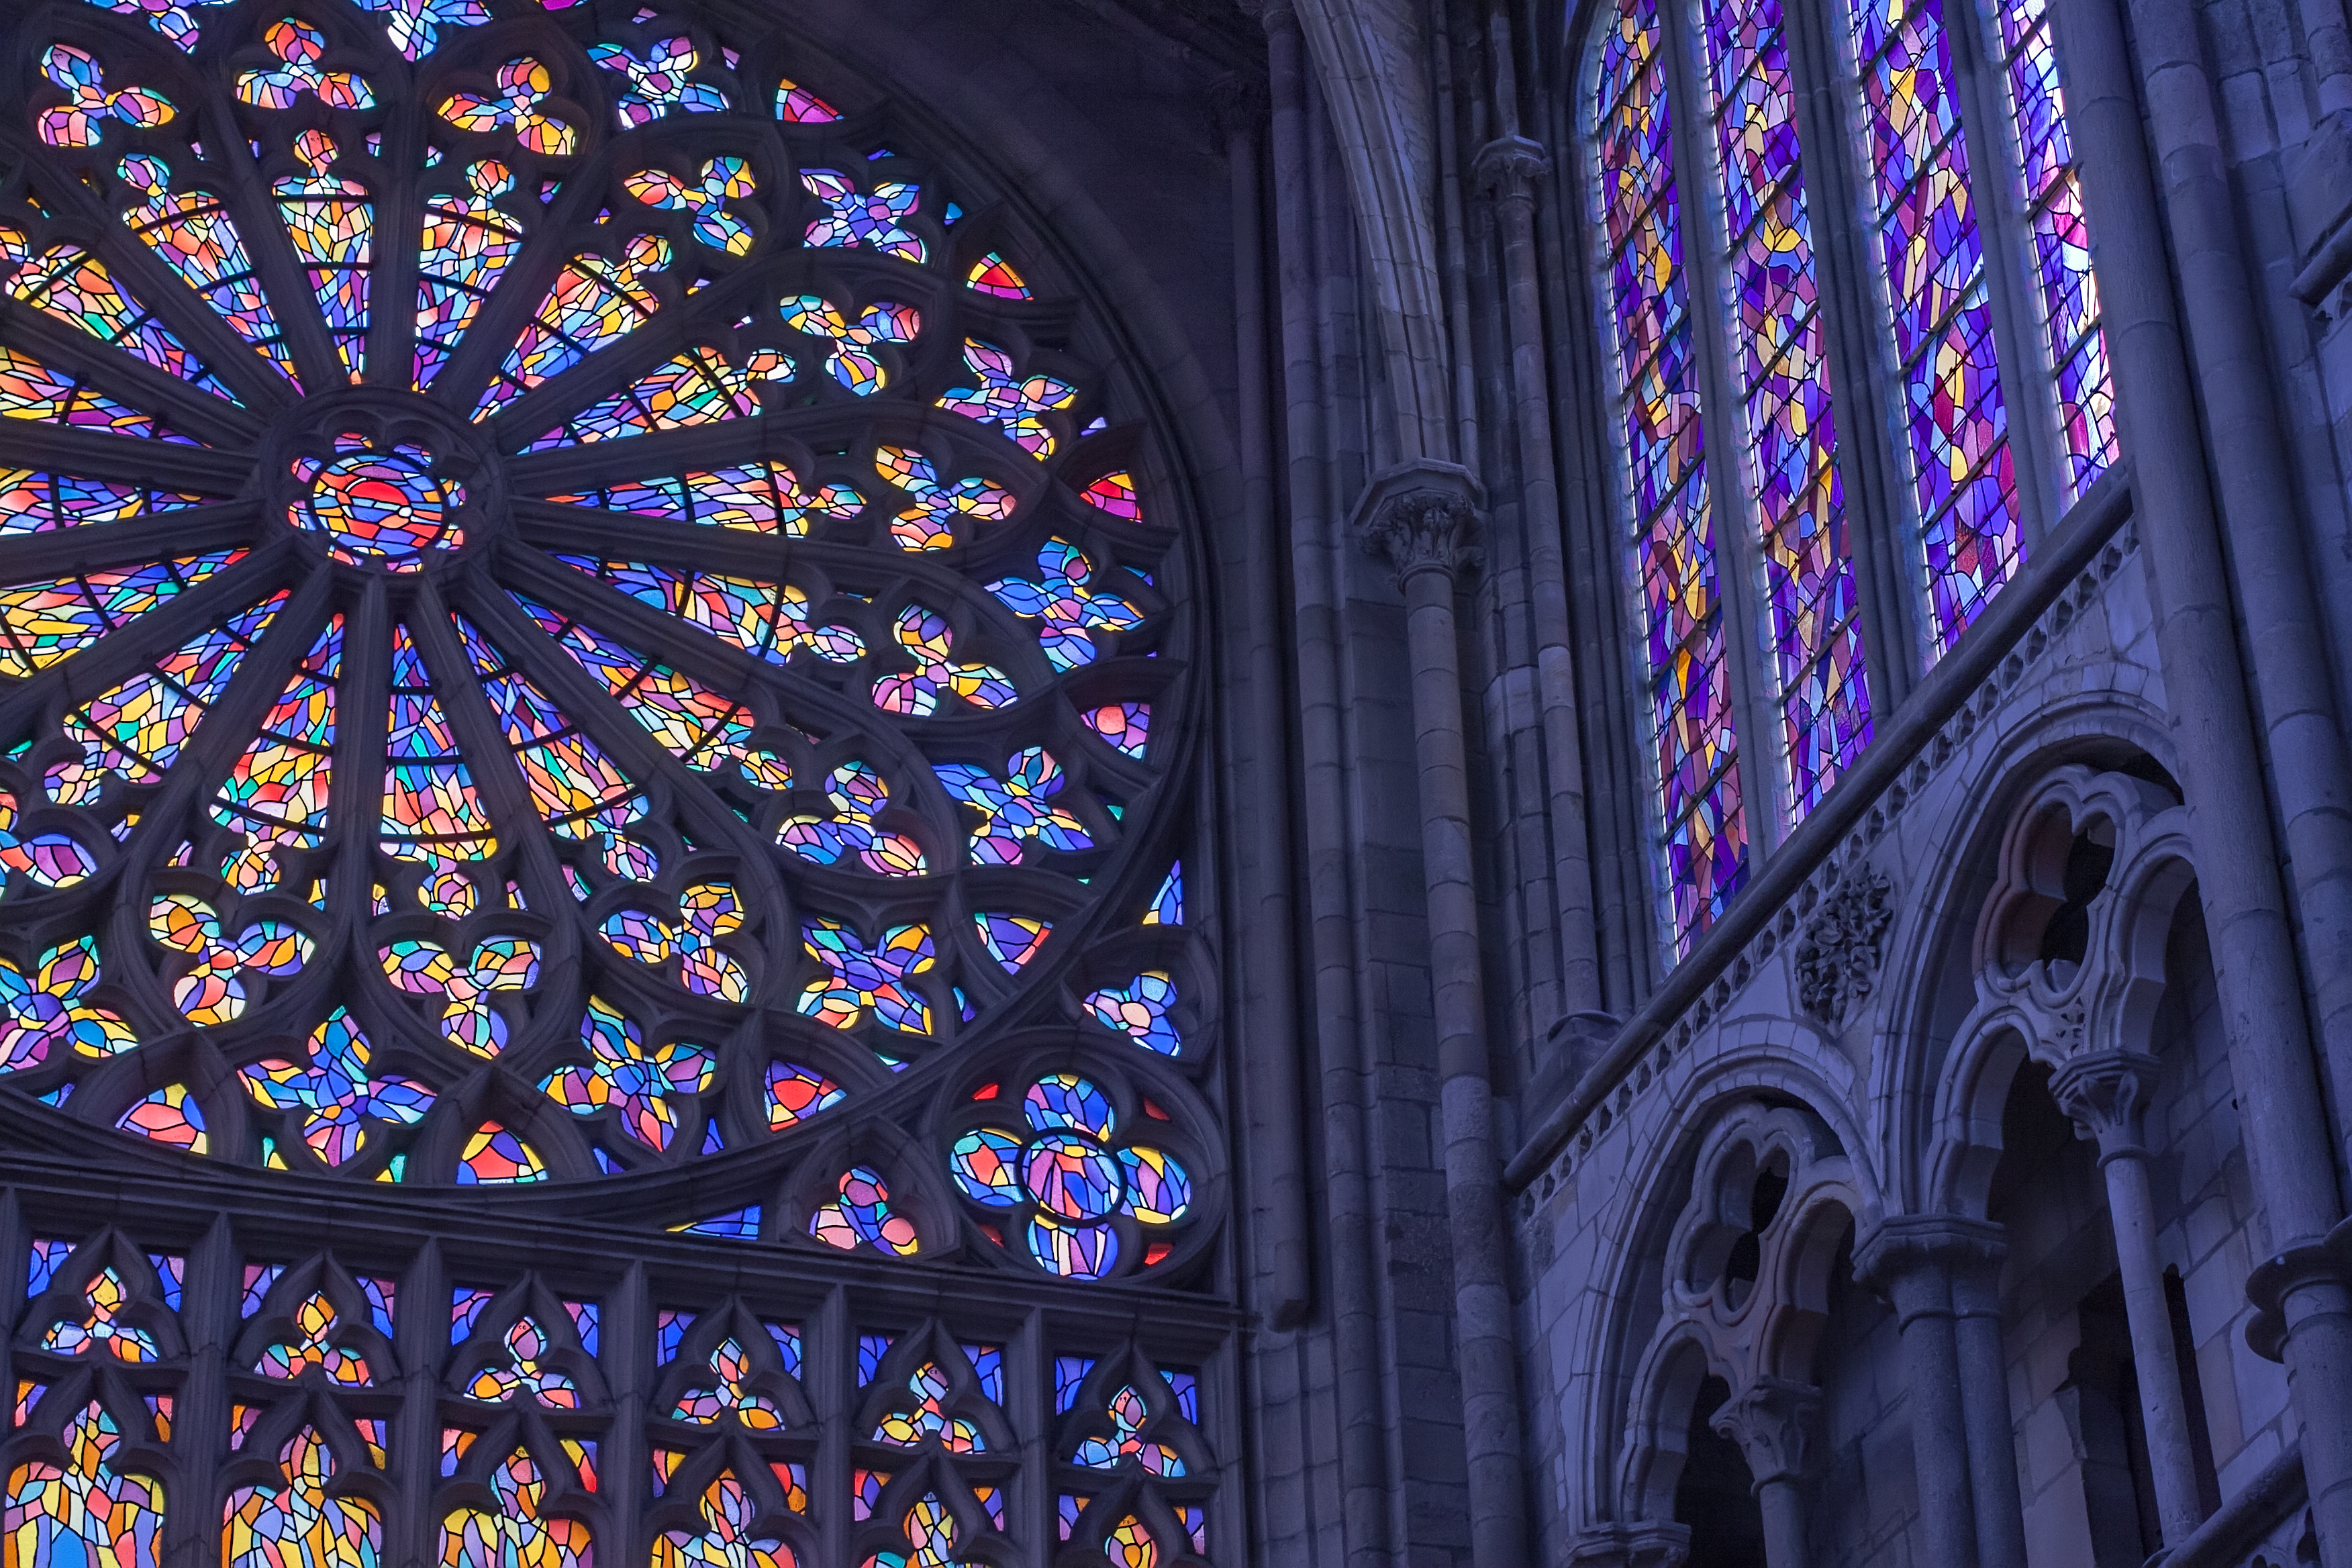 stained glass wallpaper,stained glass,glass,gothic architecture,architecture,landmark